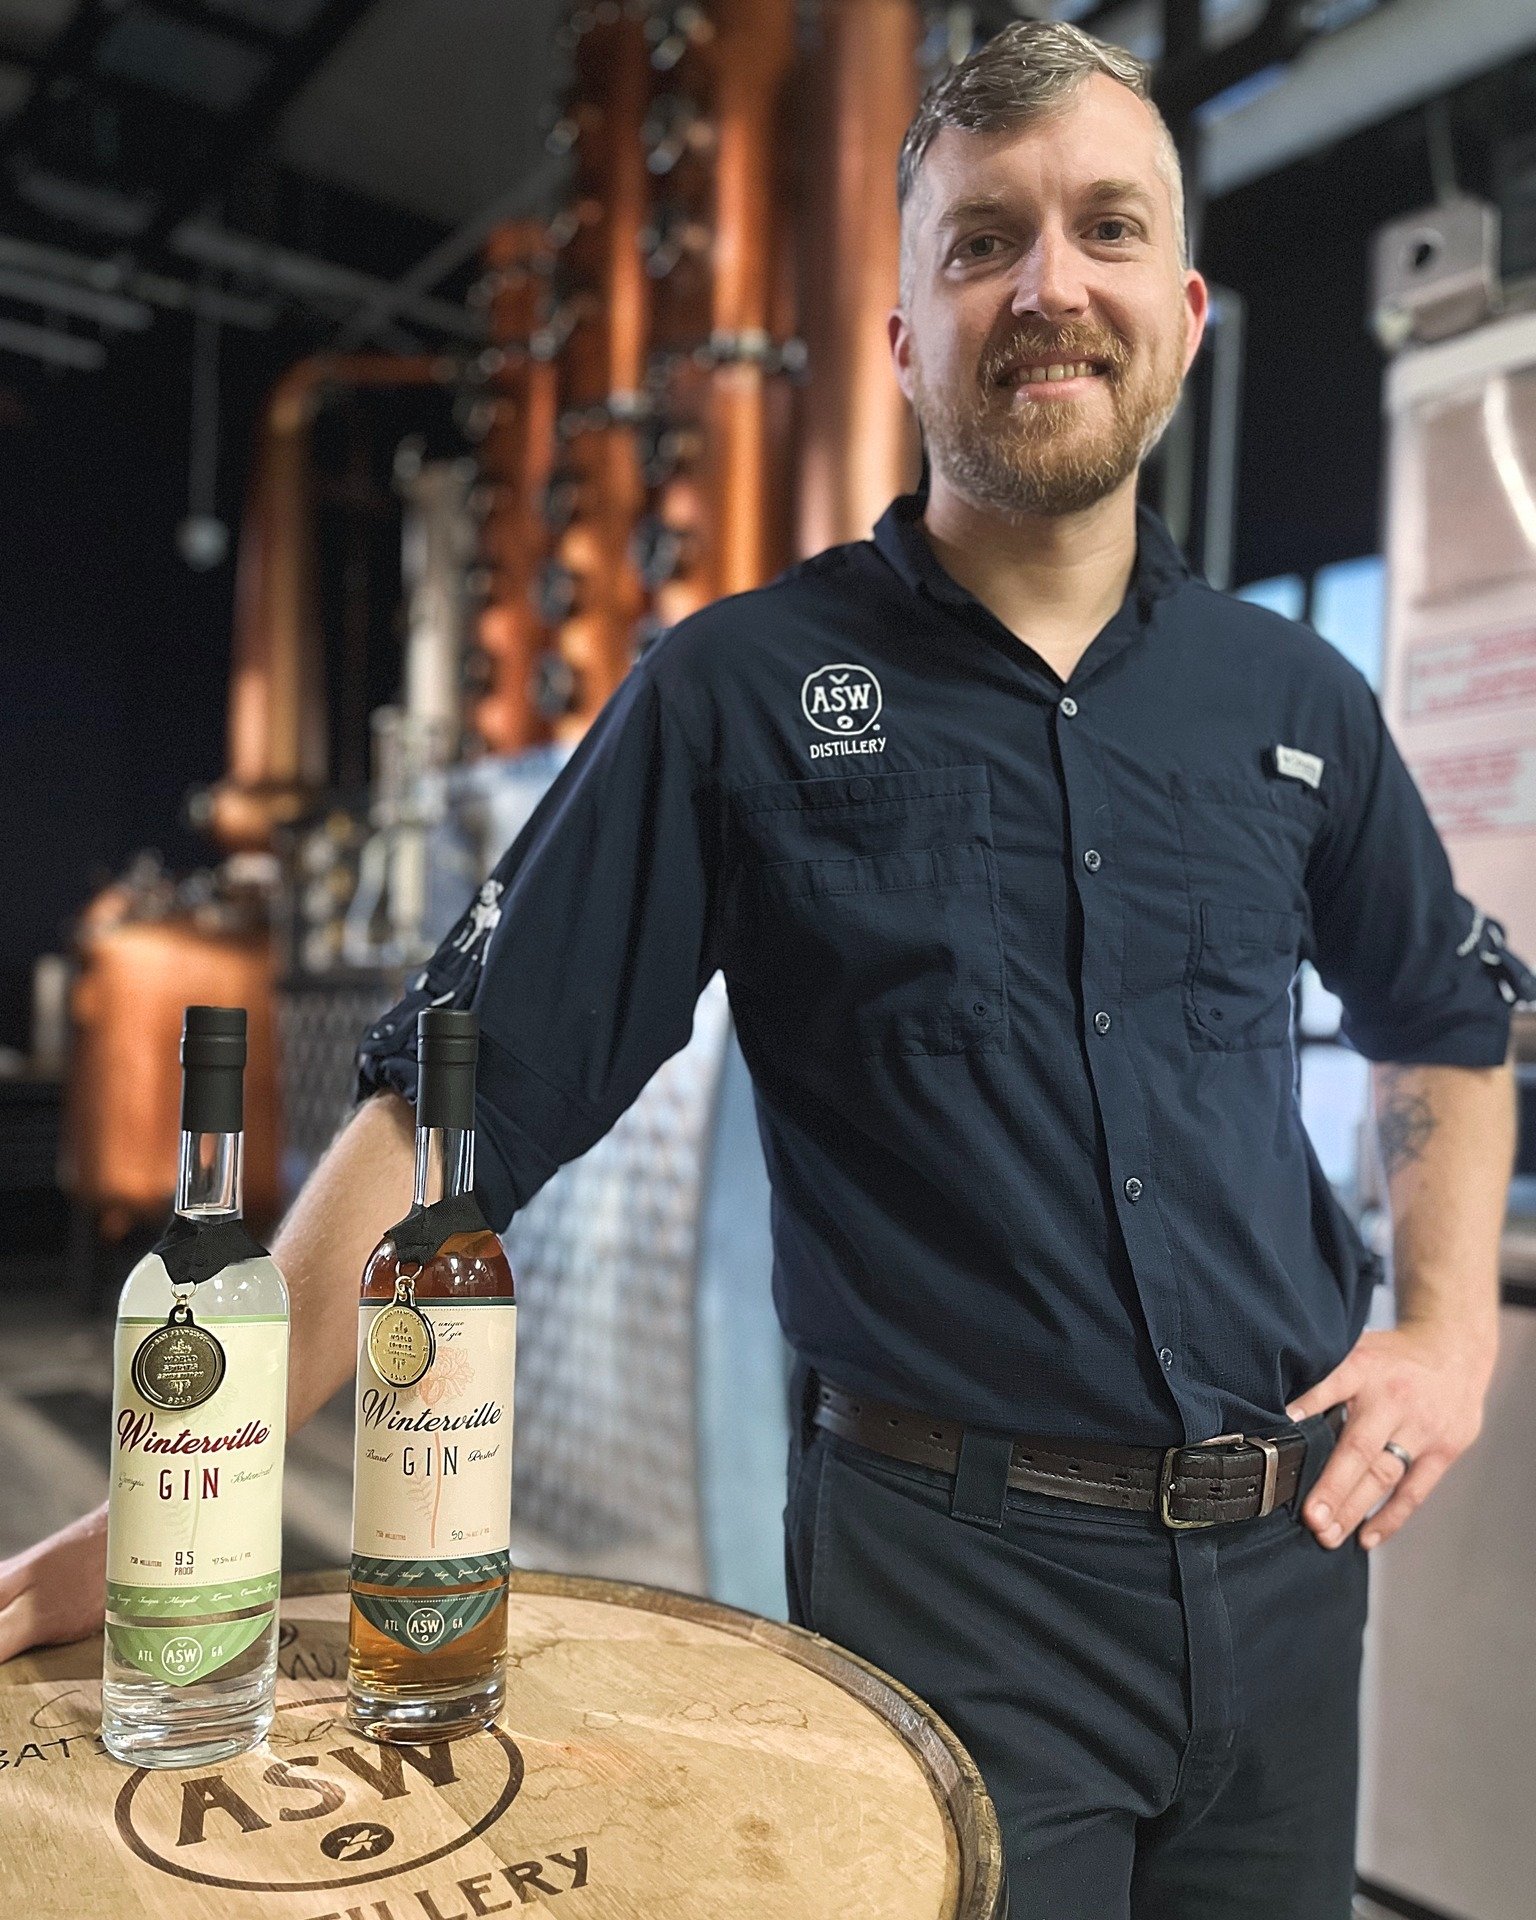 Starting May off on the right foot with a clean sweep of Gold Medals for our gin portfolio at this year's @sfwspiritscomp &ndash; huge congratulations to Distiller @jerrydistilled! If you haven't yet tried the Barrel Rested Winterville Gin, you may w